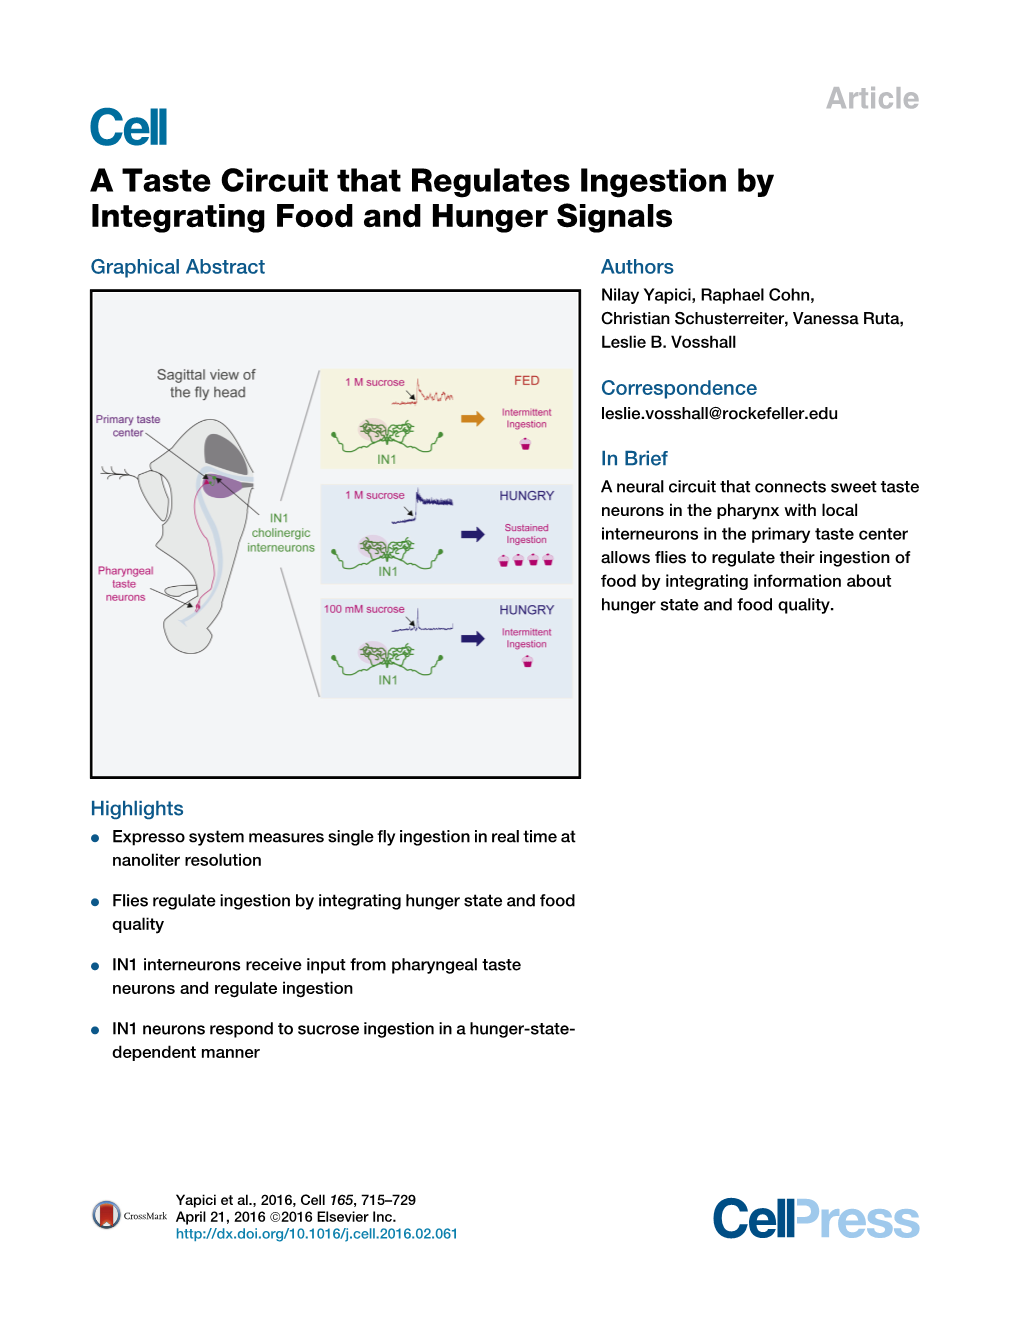 A Taste Circuit That Regulates Ingestion by Integrating Food and Hunger Signals